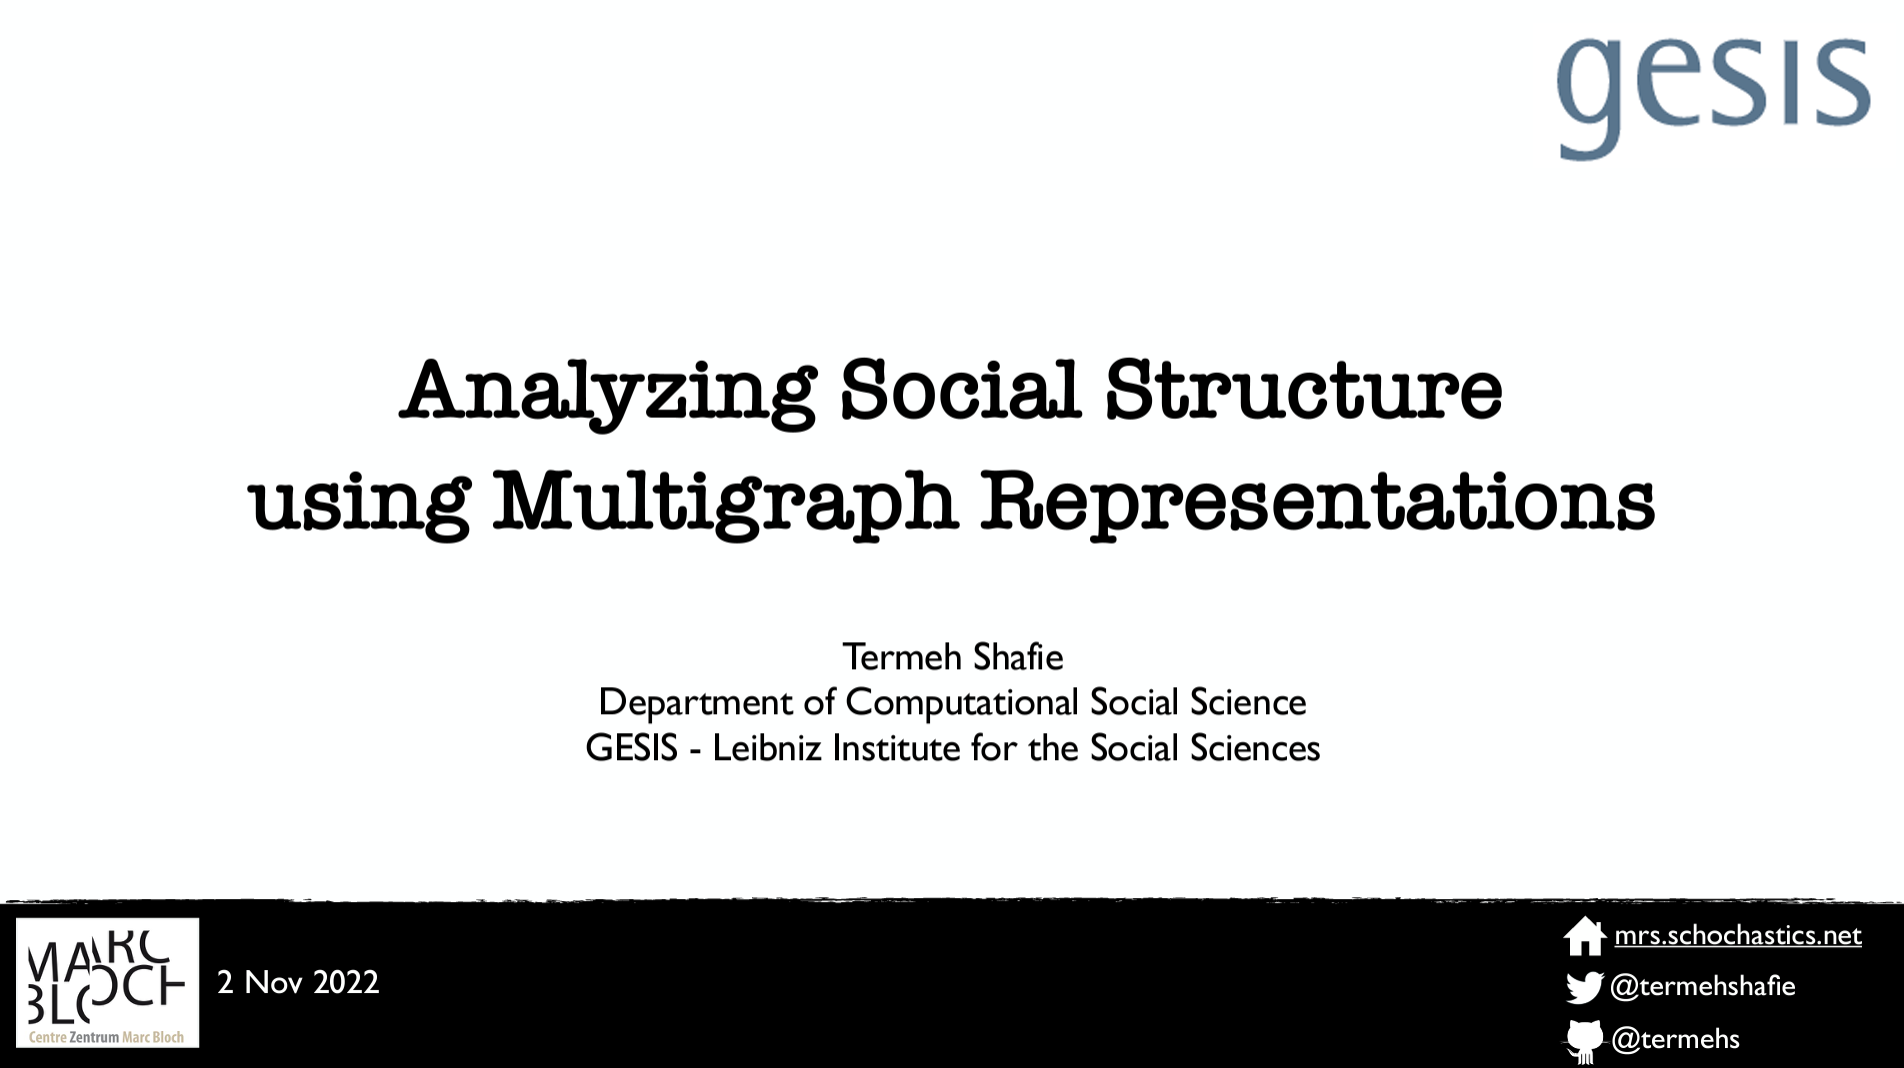 title slide of a presentation titled "analyzing social structure using multigraph representations"